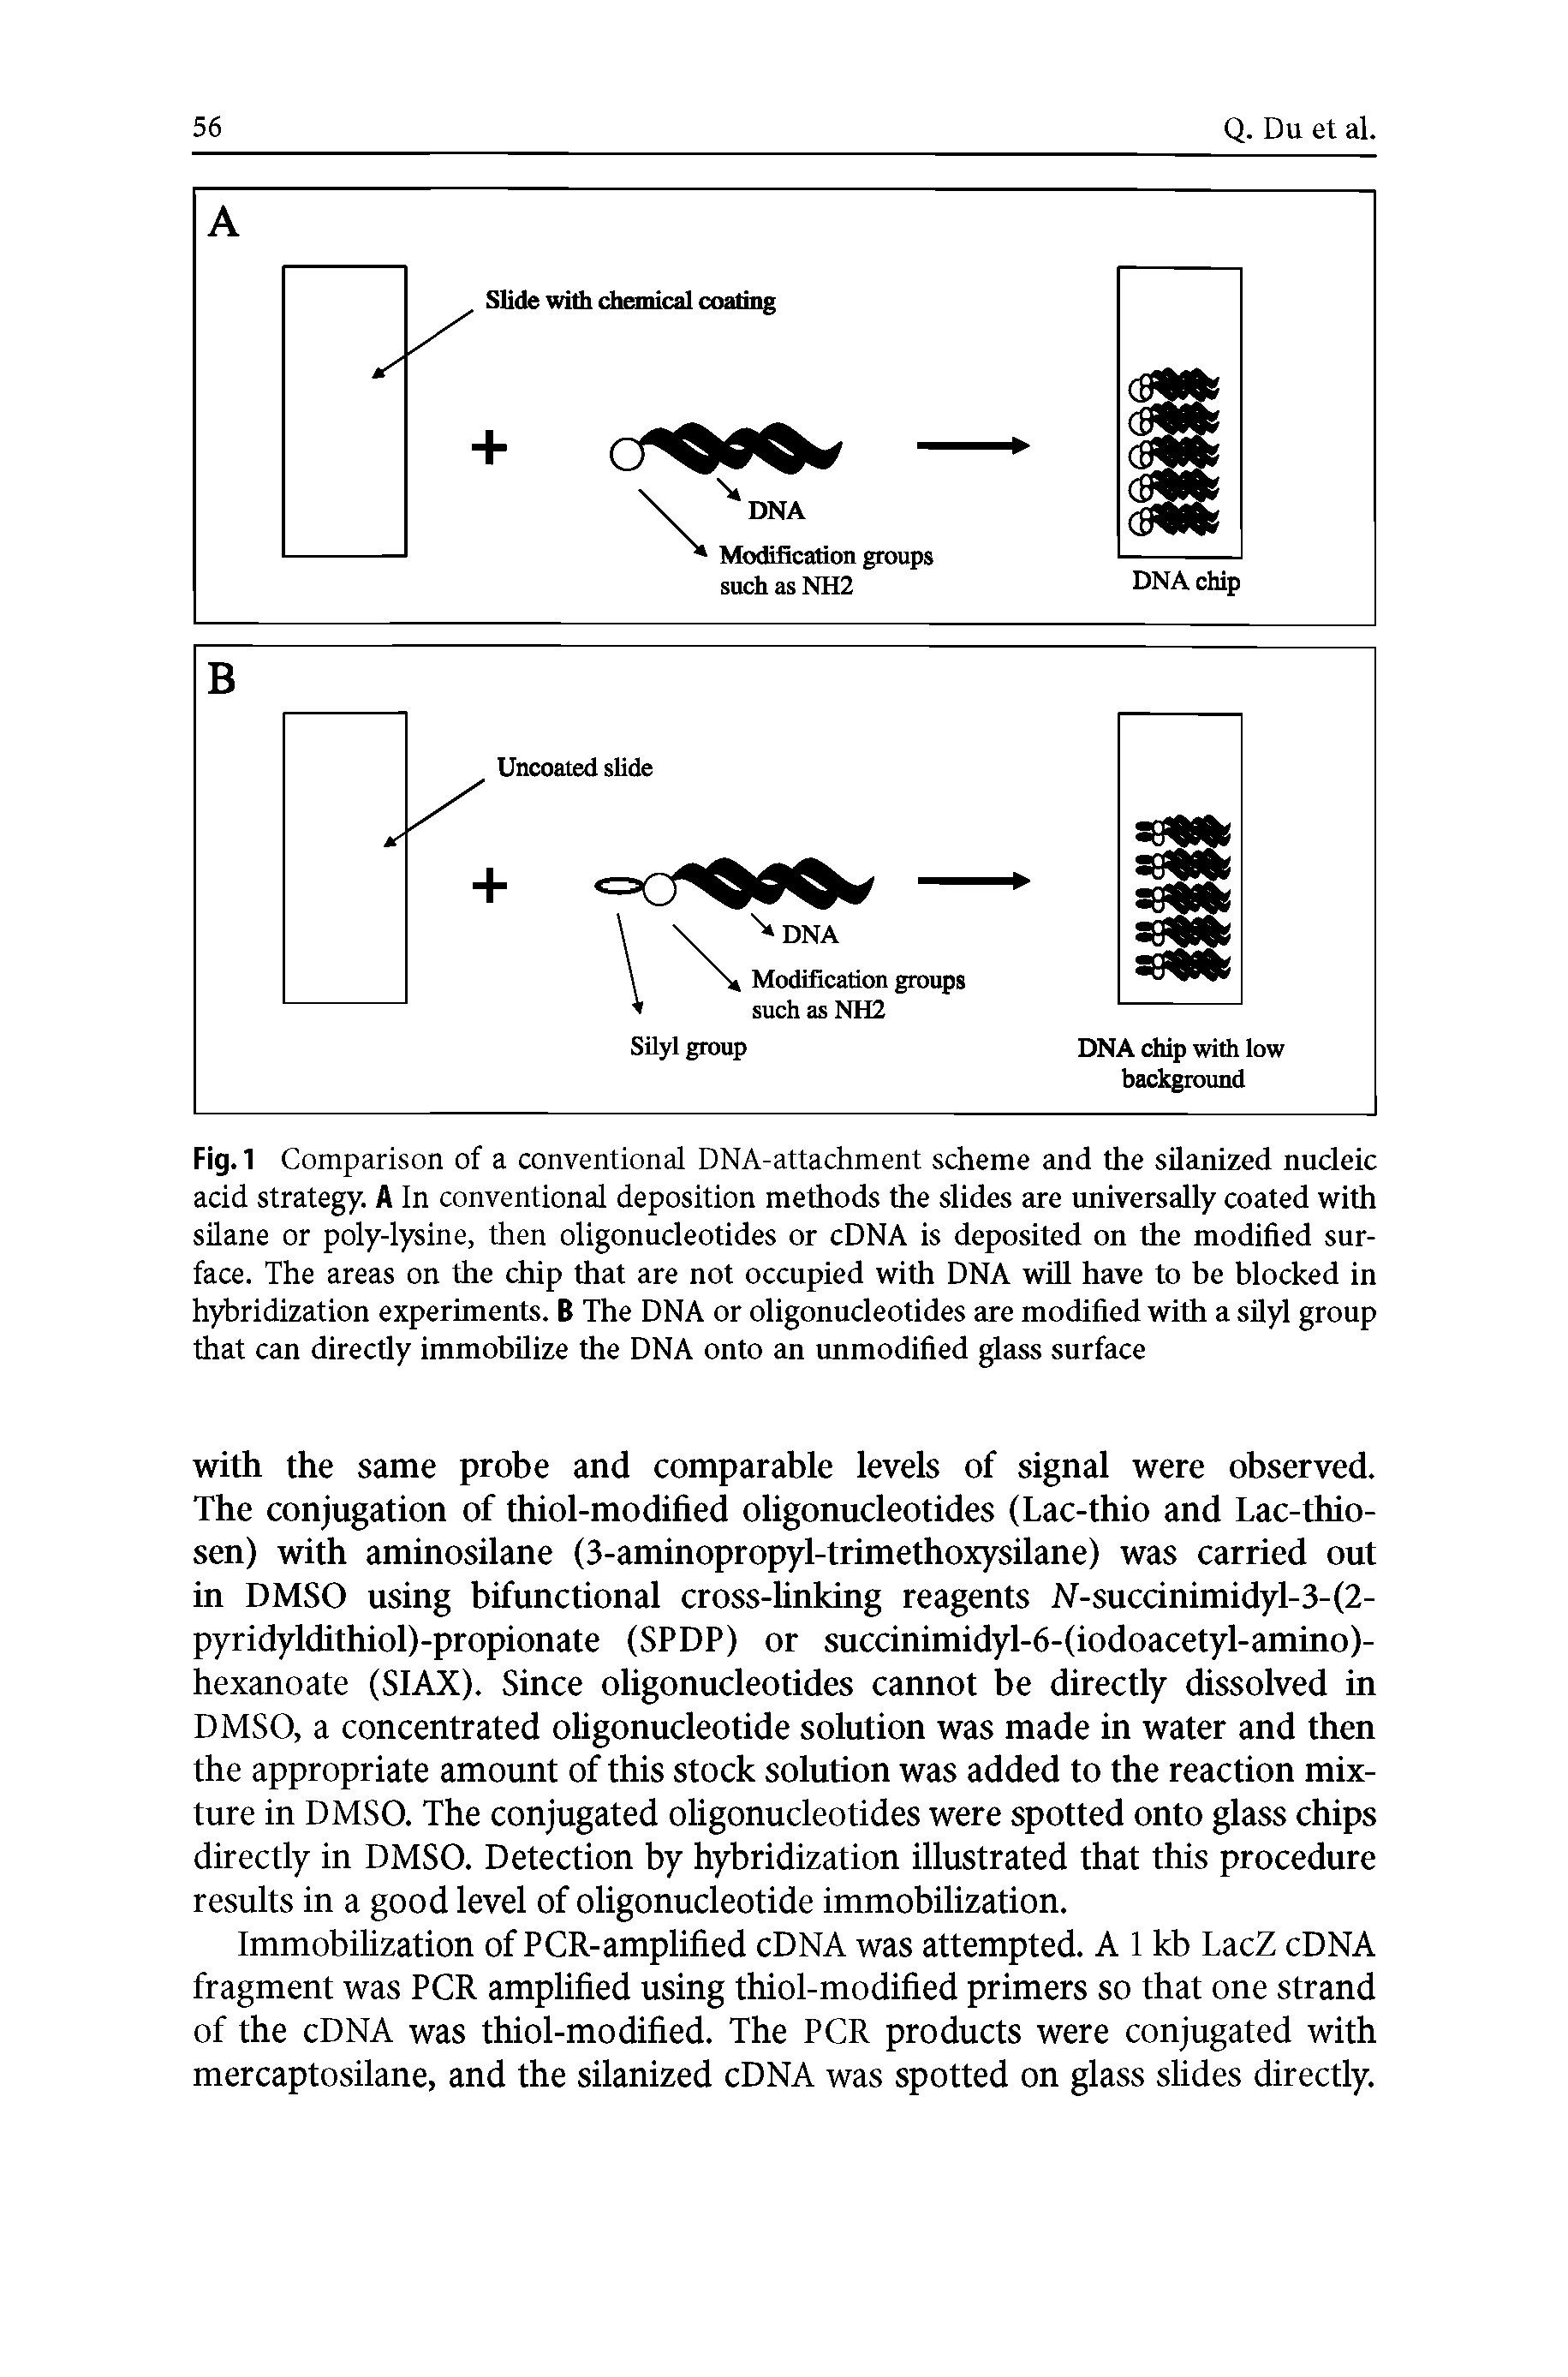 Fig. 1 Comparison of a conventional DNA-attachment scheme and the silanized nucleic acid strategy. A In conventional deposition methods the slides are universally coated with silane or poly-lysine, then oligonucleotides or cDNA is deposited on the modified surface. The areas on the chip that are not occupied with DNA will have to be blocked in hybridization experiments. B The DNA or oligonucleotides are modified with a silyl group that can directly immobilize the DNA onto an unmodified glass surface...